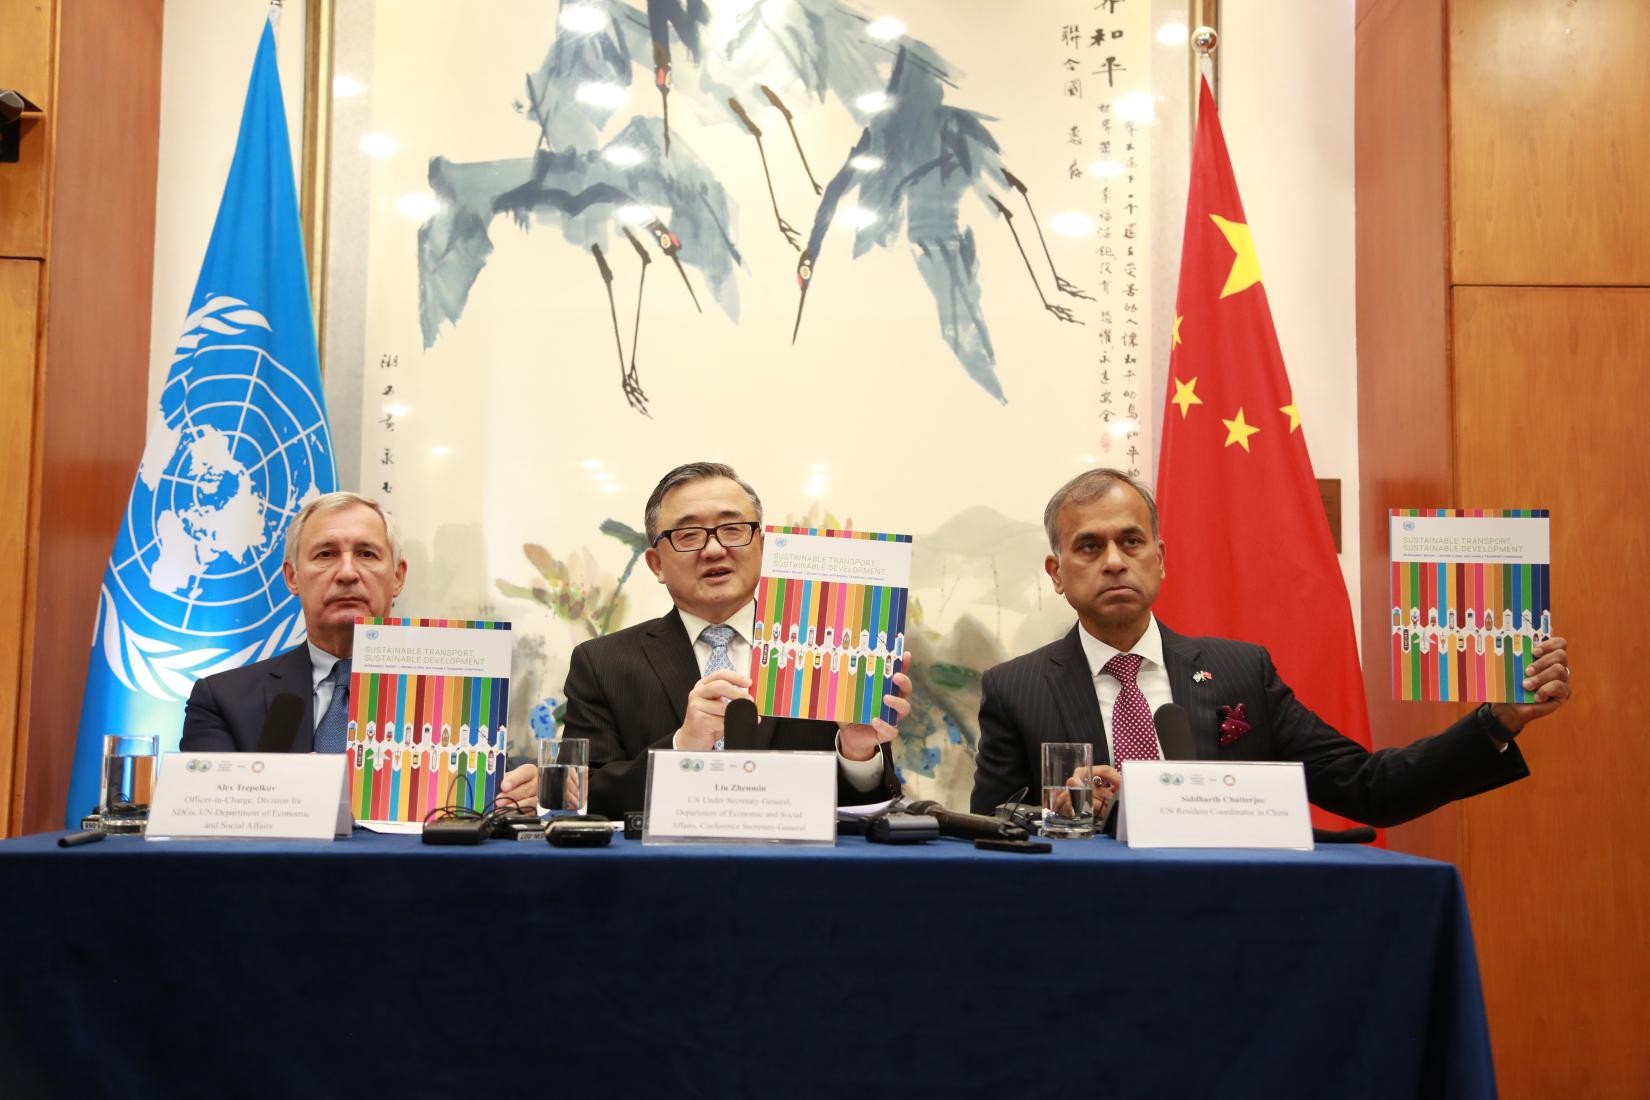 Officer-in-Charge of the Division for Sustainable Development Goals, Alexander Trepelkov, UN Under-Secretary-General of the Department of Economic and Social Affairs (UN DESA) and Conference Secretary-General, Liu Zhenmin, UN Resident Coordinator in China, Siddharth Chatterjee at curtain raiser sustainable transport press conference. (left to right)